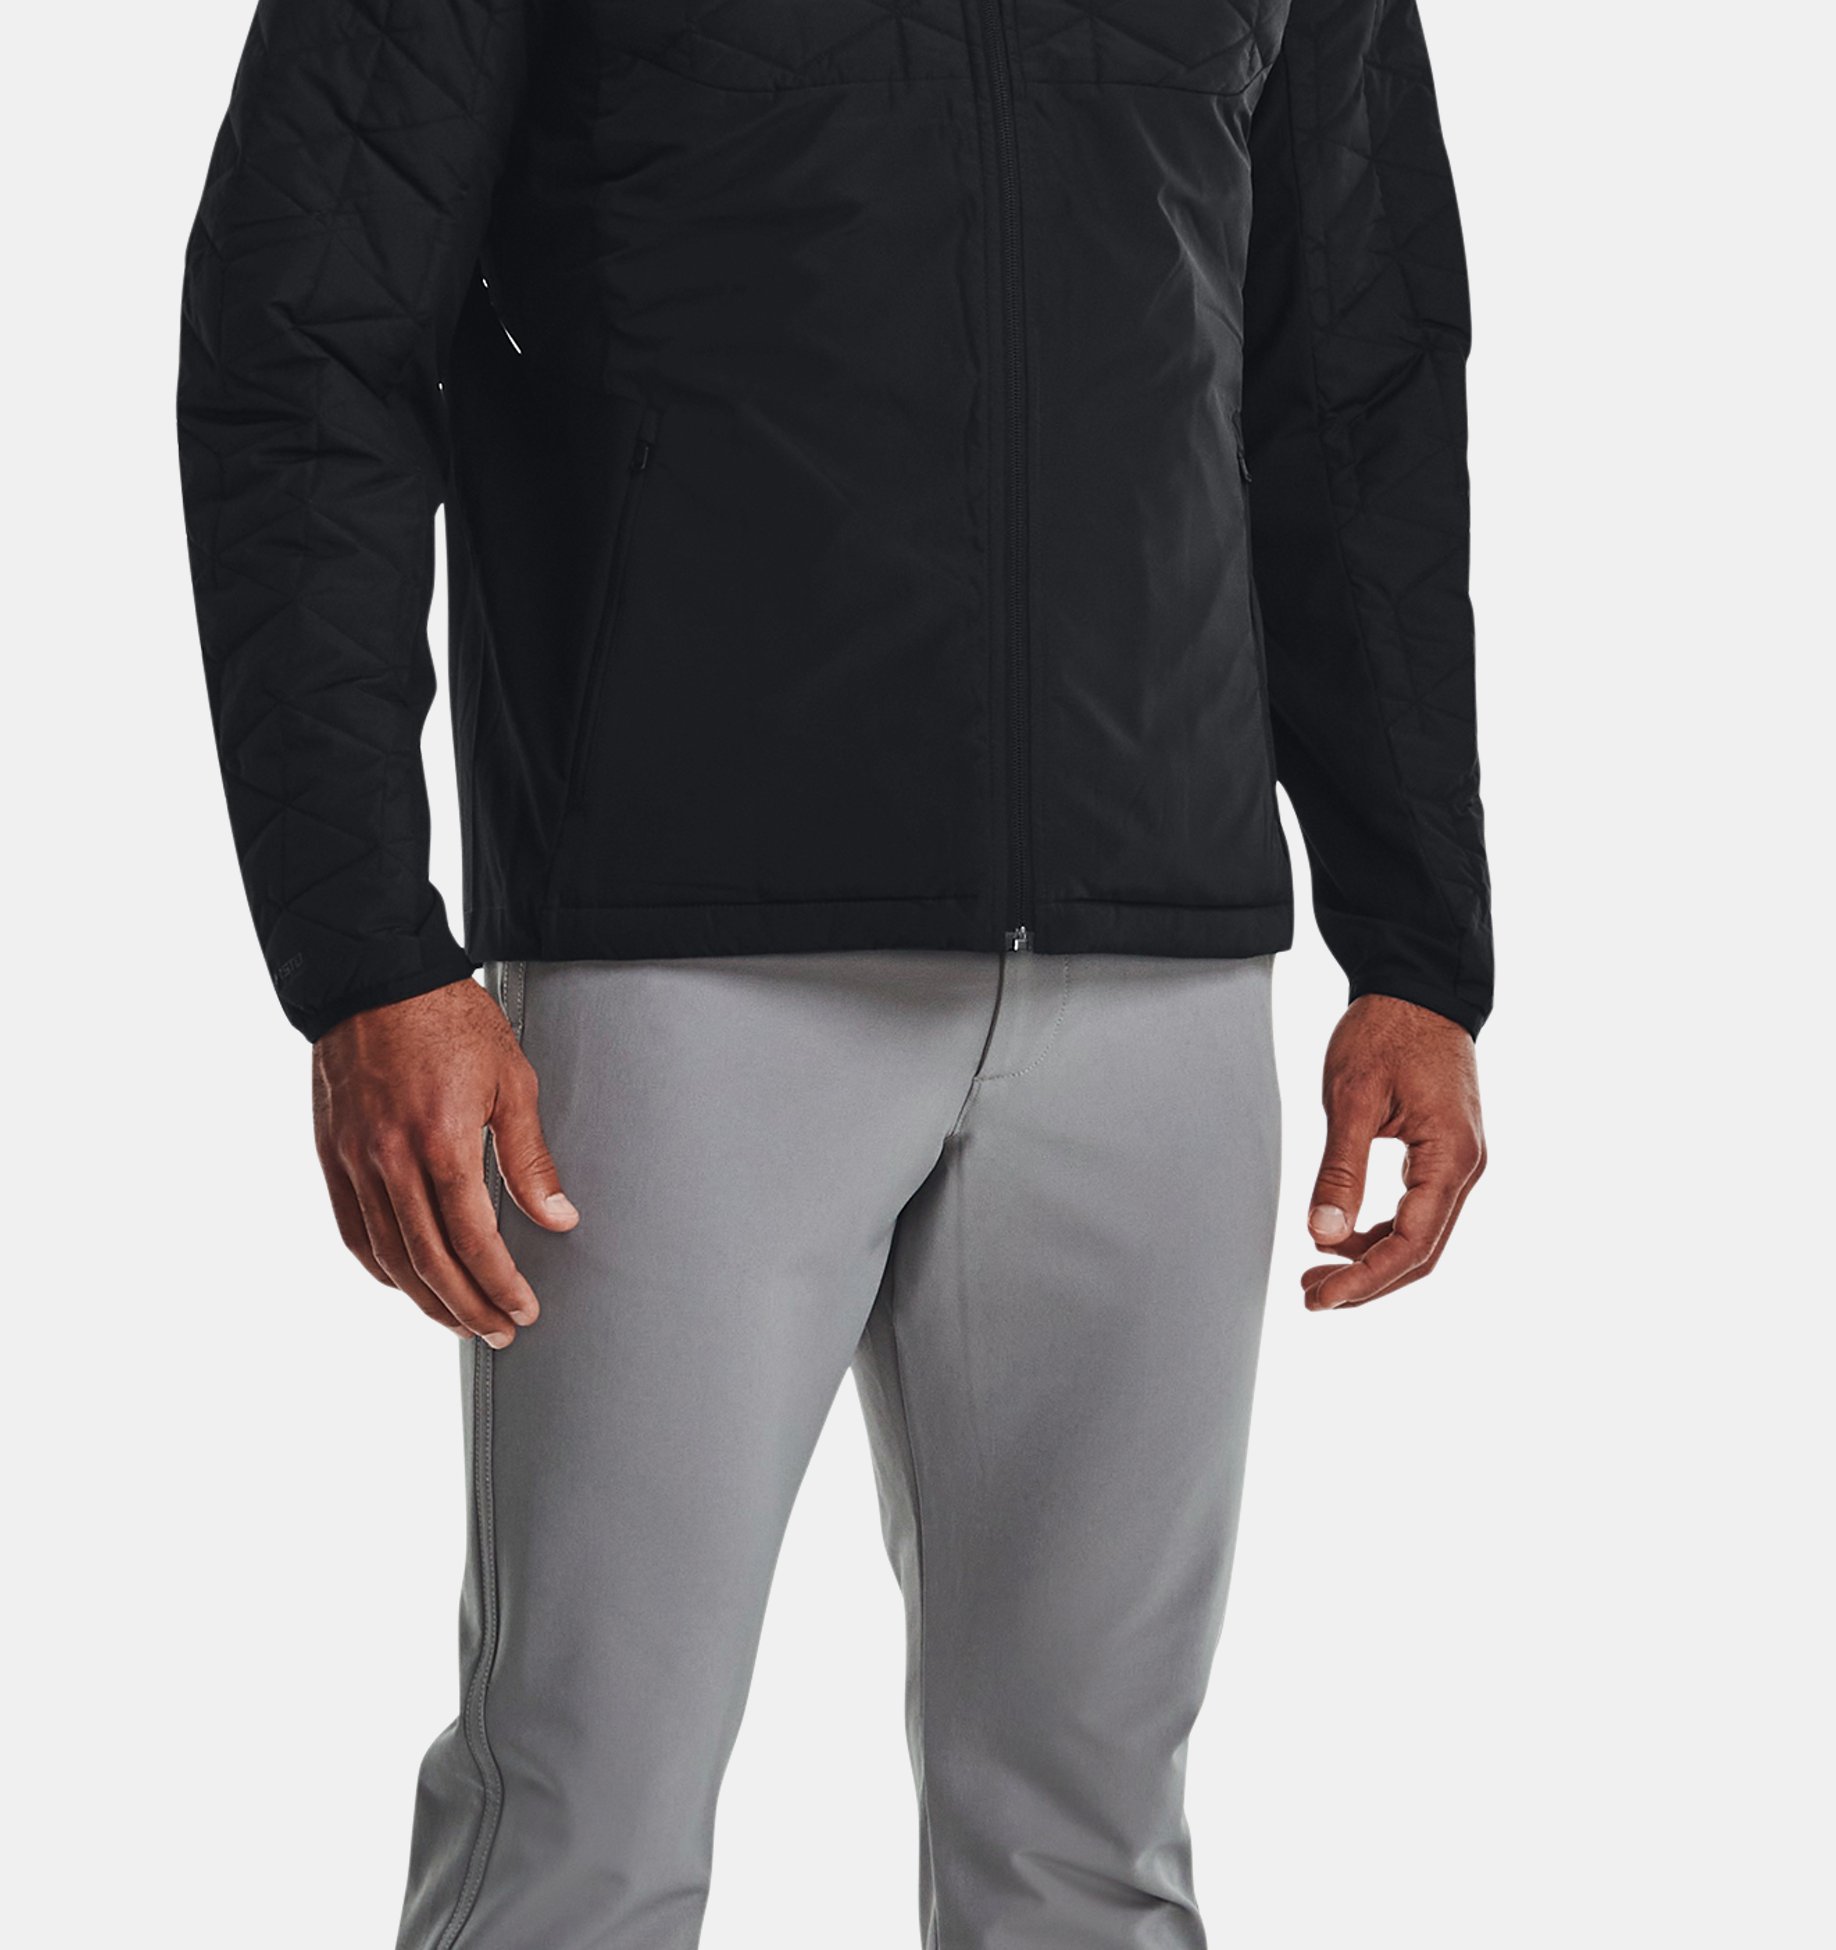 https://underarmour.scene7.com/is/image/Underarmour/V5-1364642-001_FSF?rp=standard-0pad|pdpZoomDesktop&scl=0.72&fmt=jpg&qlt=85&resMode=sharp2&cache=on,on&bgc=f0f0f0&wid=1836&hei=1950&size=1500,1500